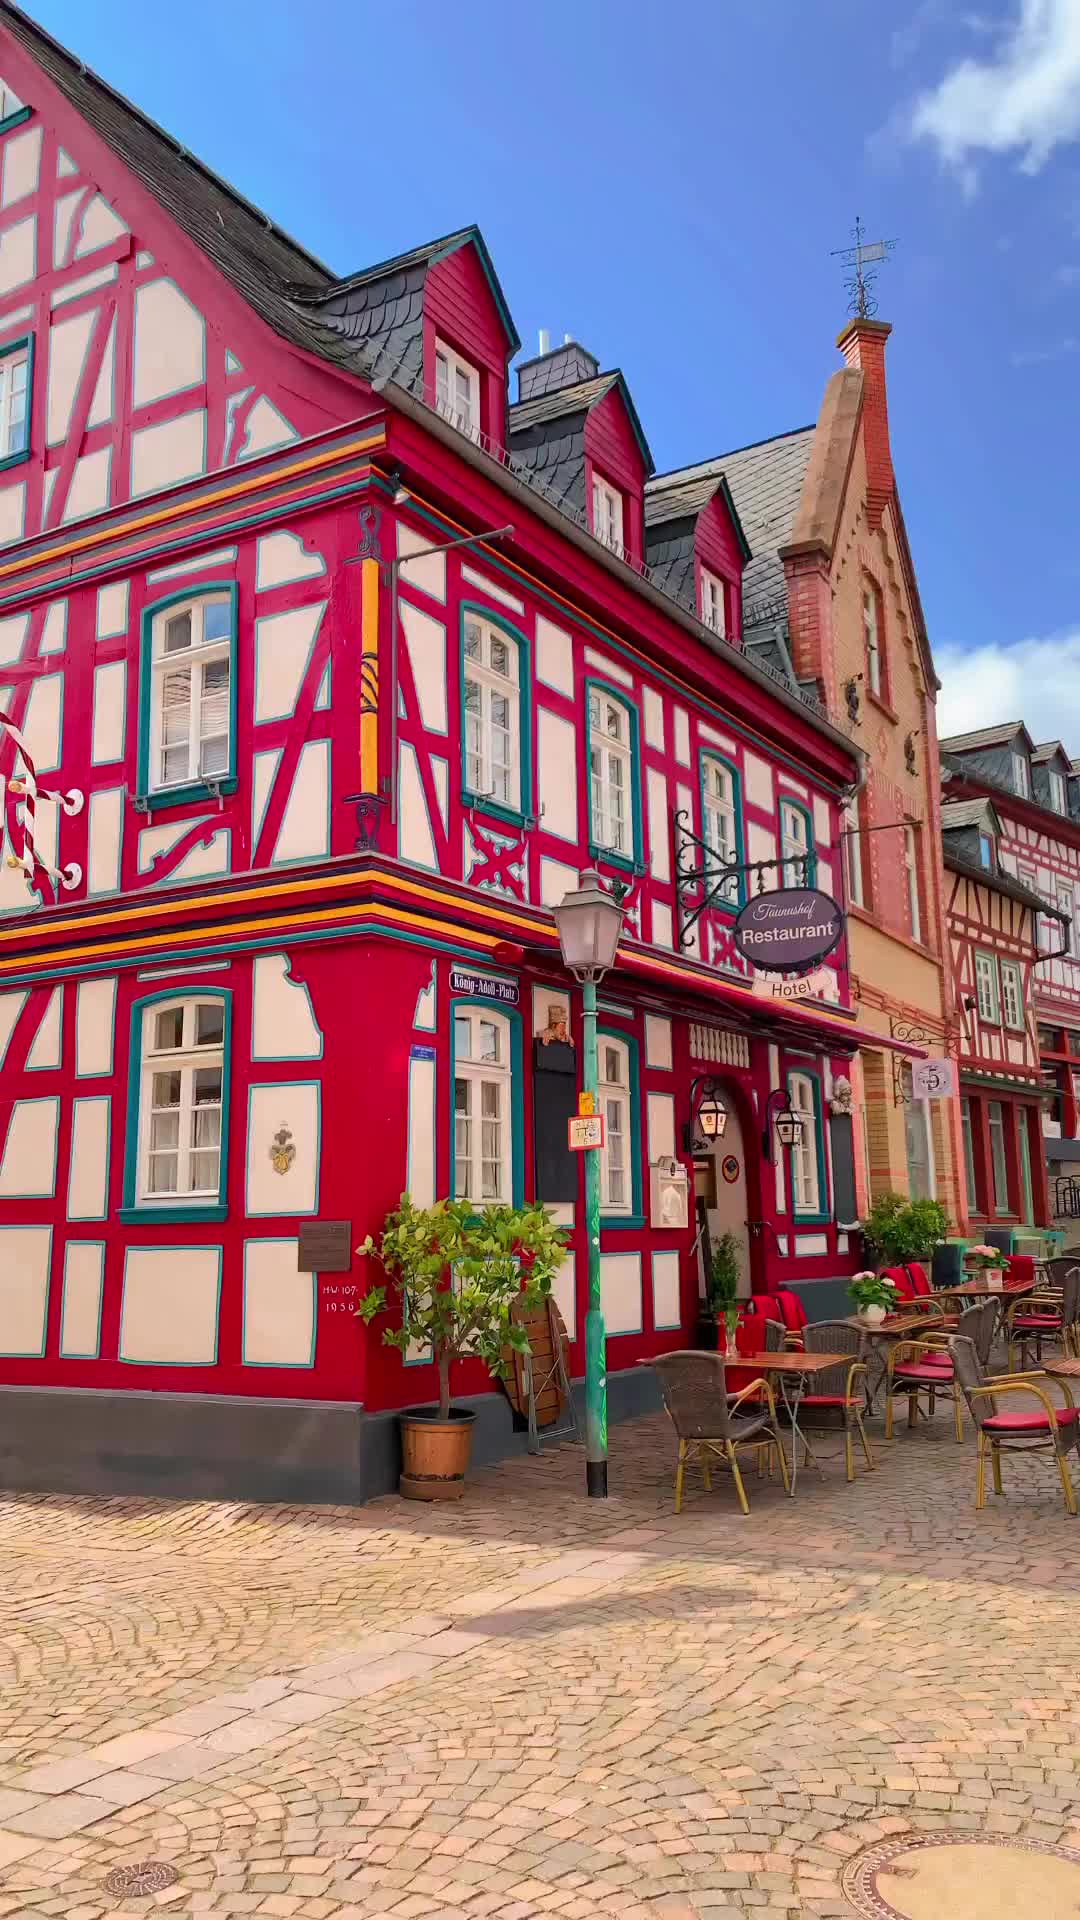 Beautiful Houses of Idstein: A Fairytale in Real Life